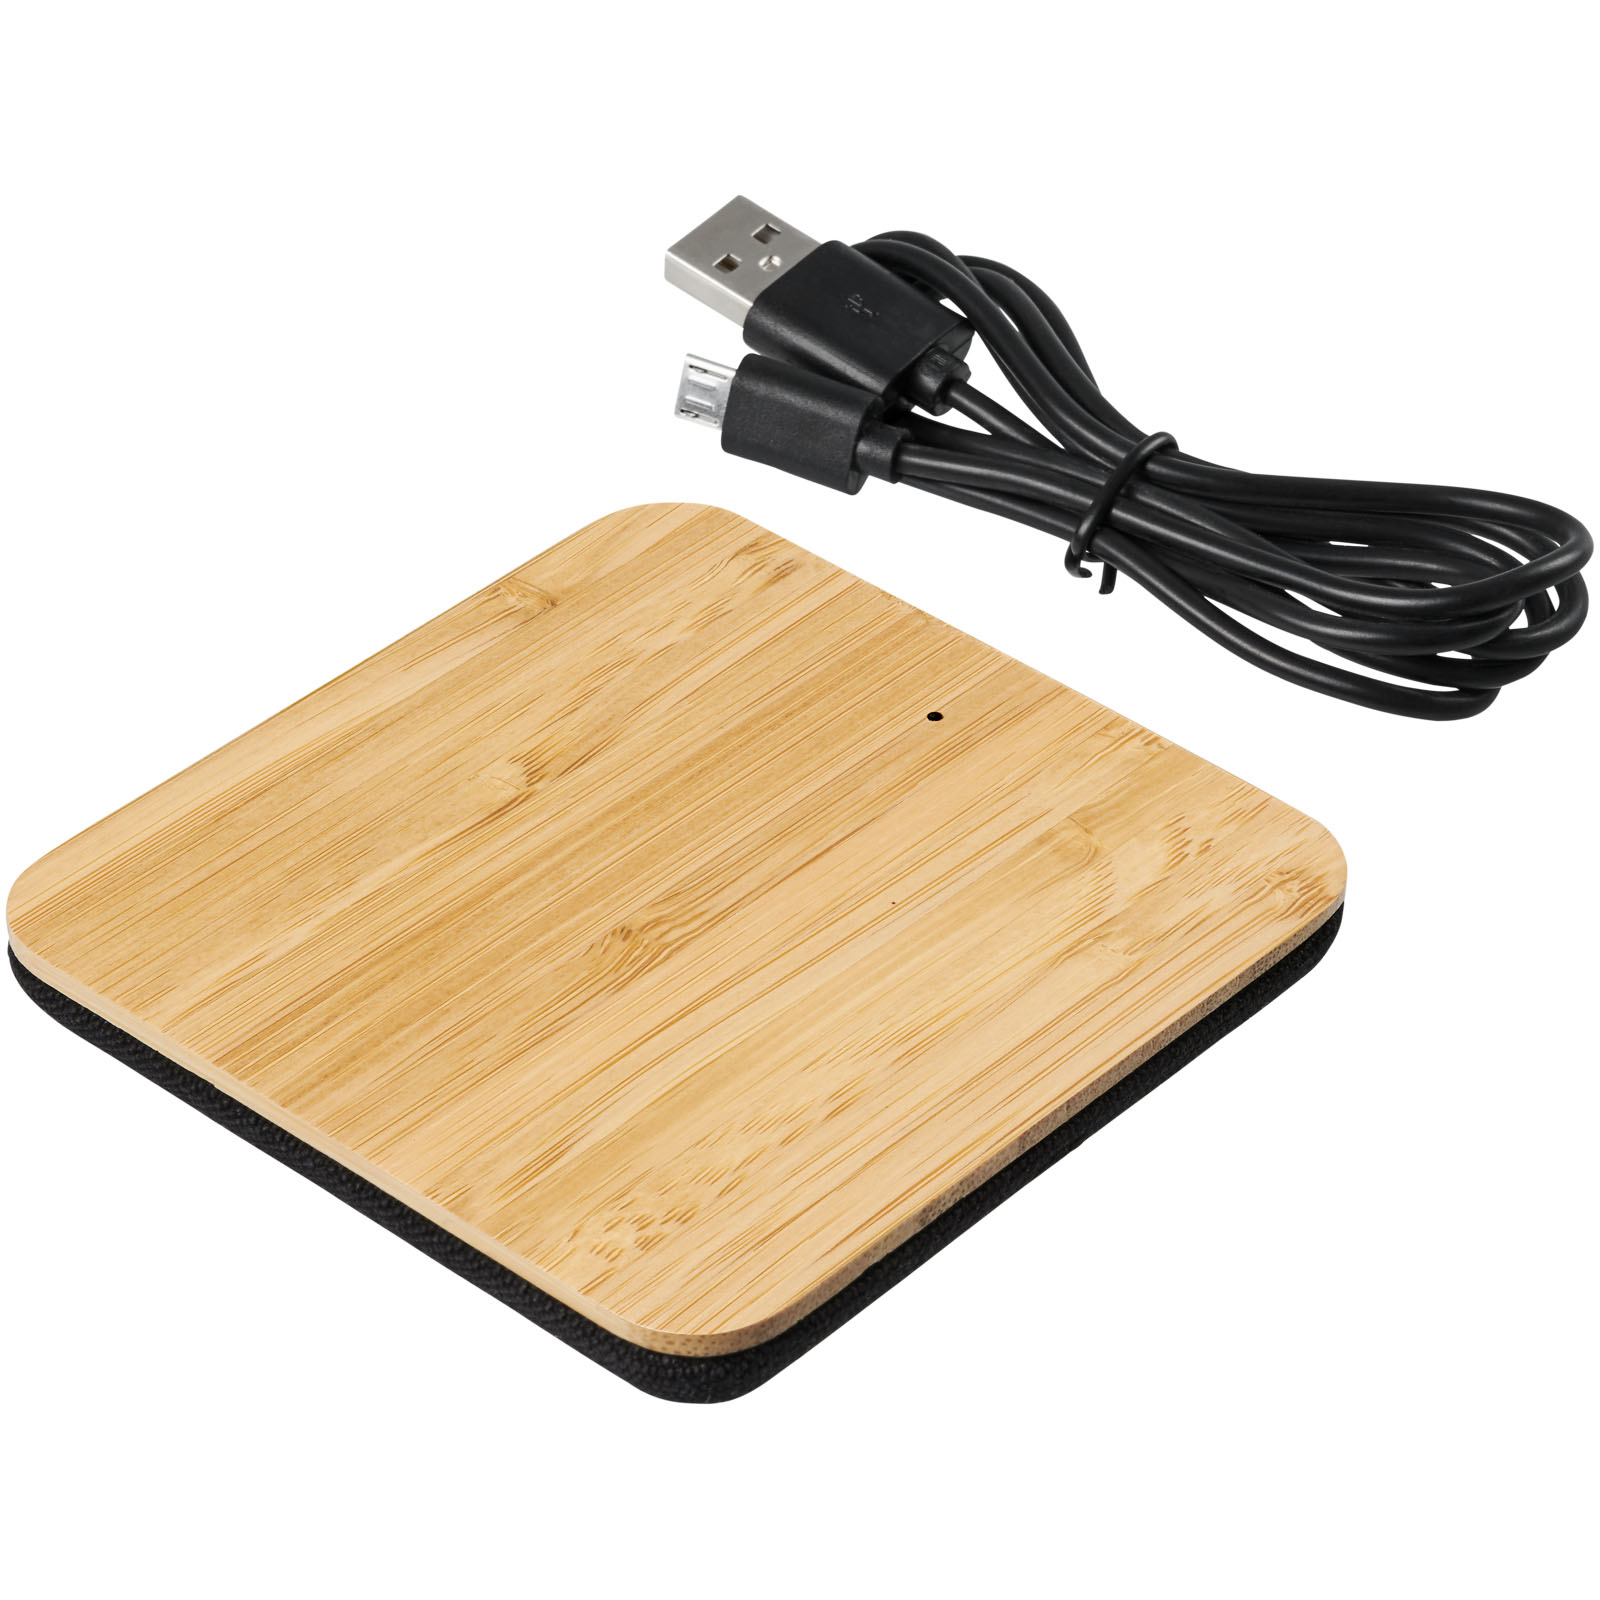 Advertising Wireless Charging - Leaf 5W bamboo and fabric wireless charging pad - 4